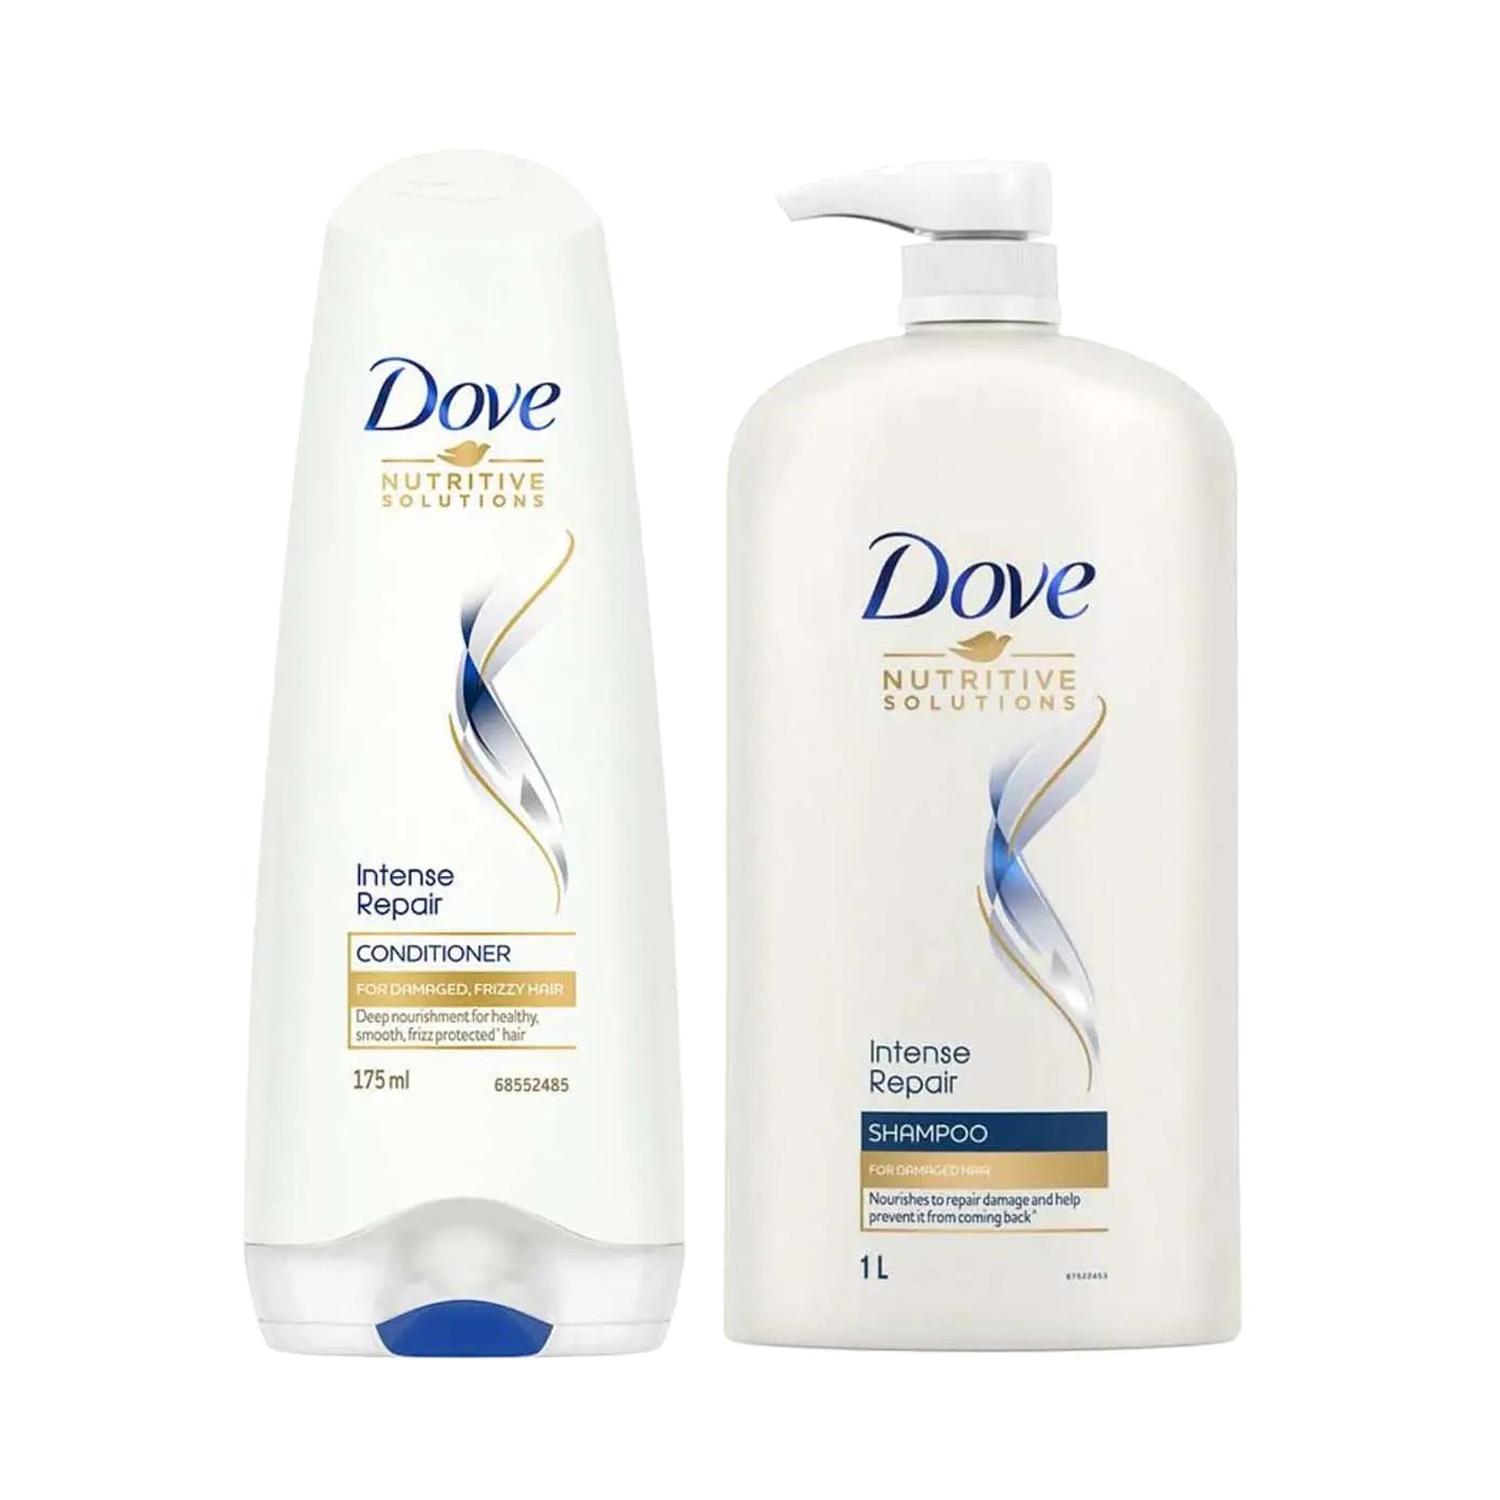 Dove | Dove Intense Repair Combo (Buy 1Ltr Shampoo and Get 190ml Conditioner Free)